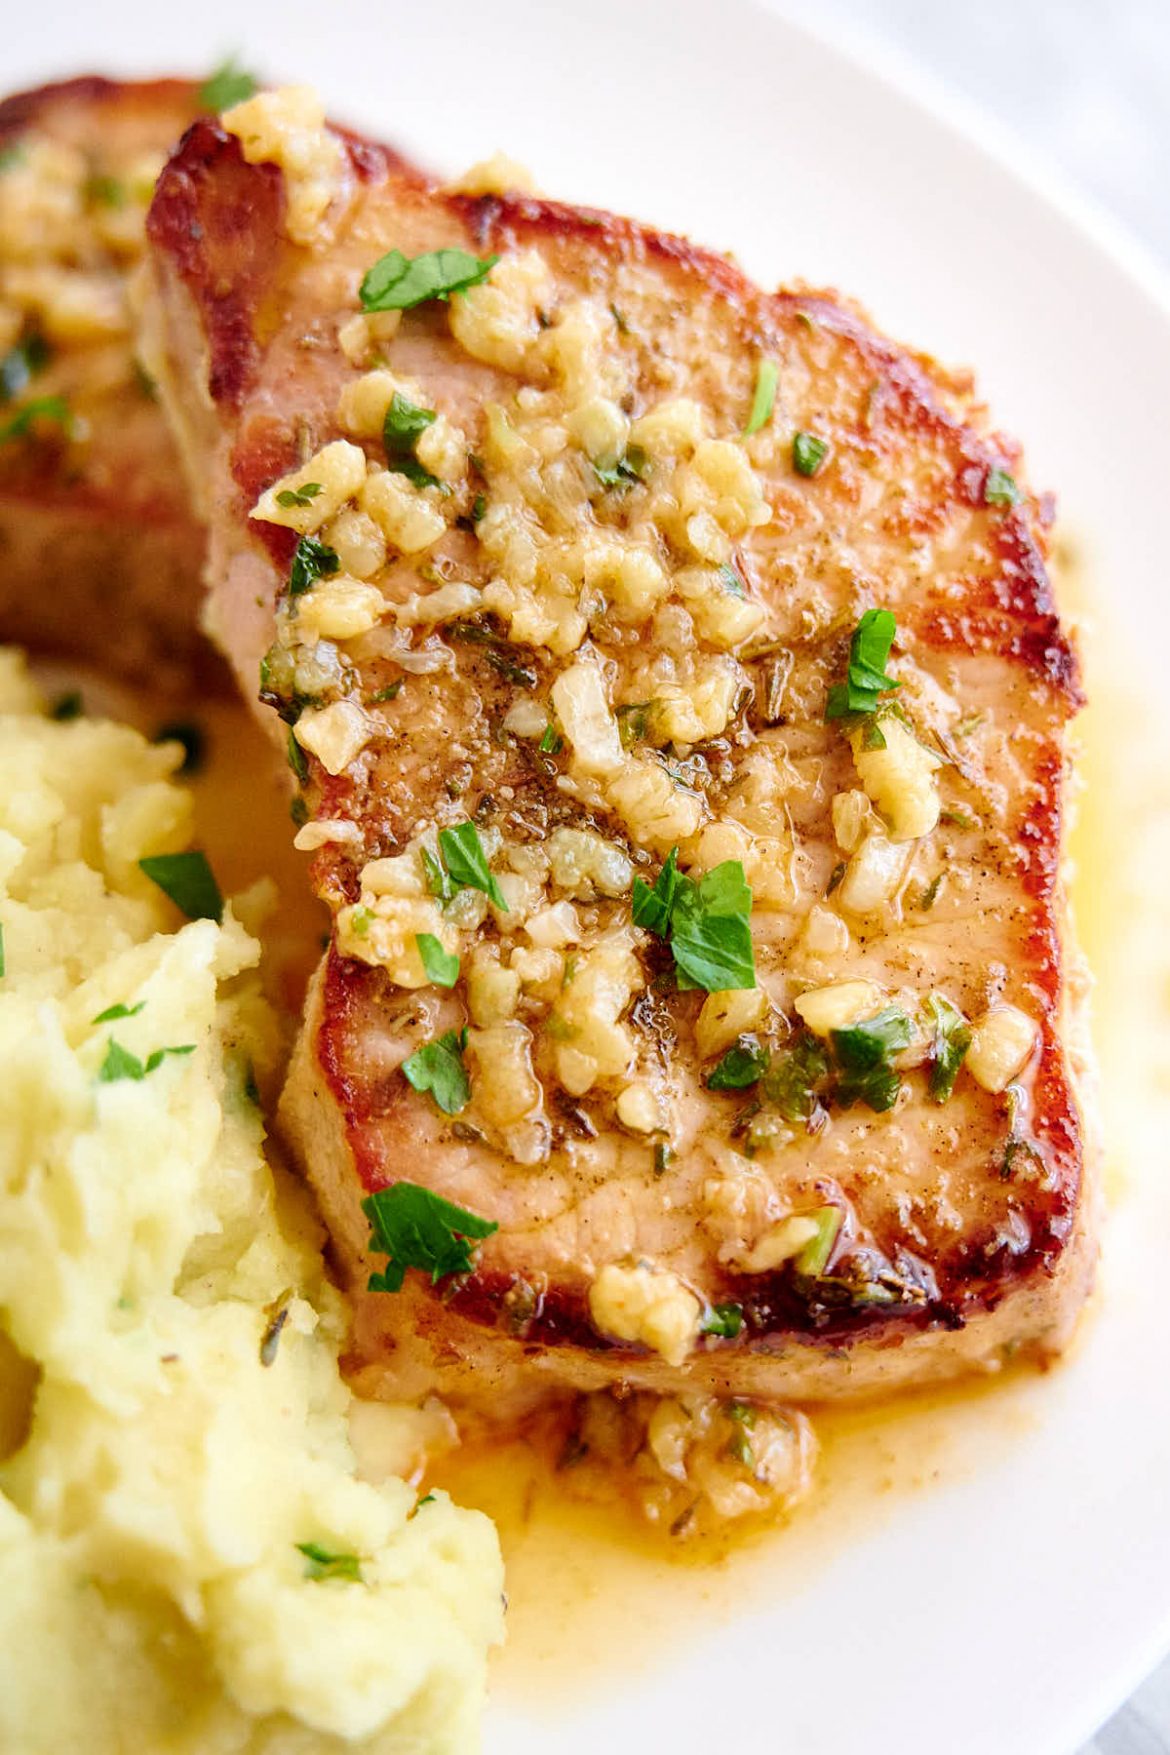 Baked Pork Chops with Browned Garlic Butter - Craving Tasty